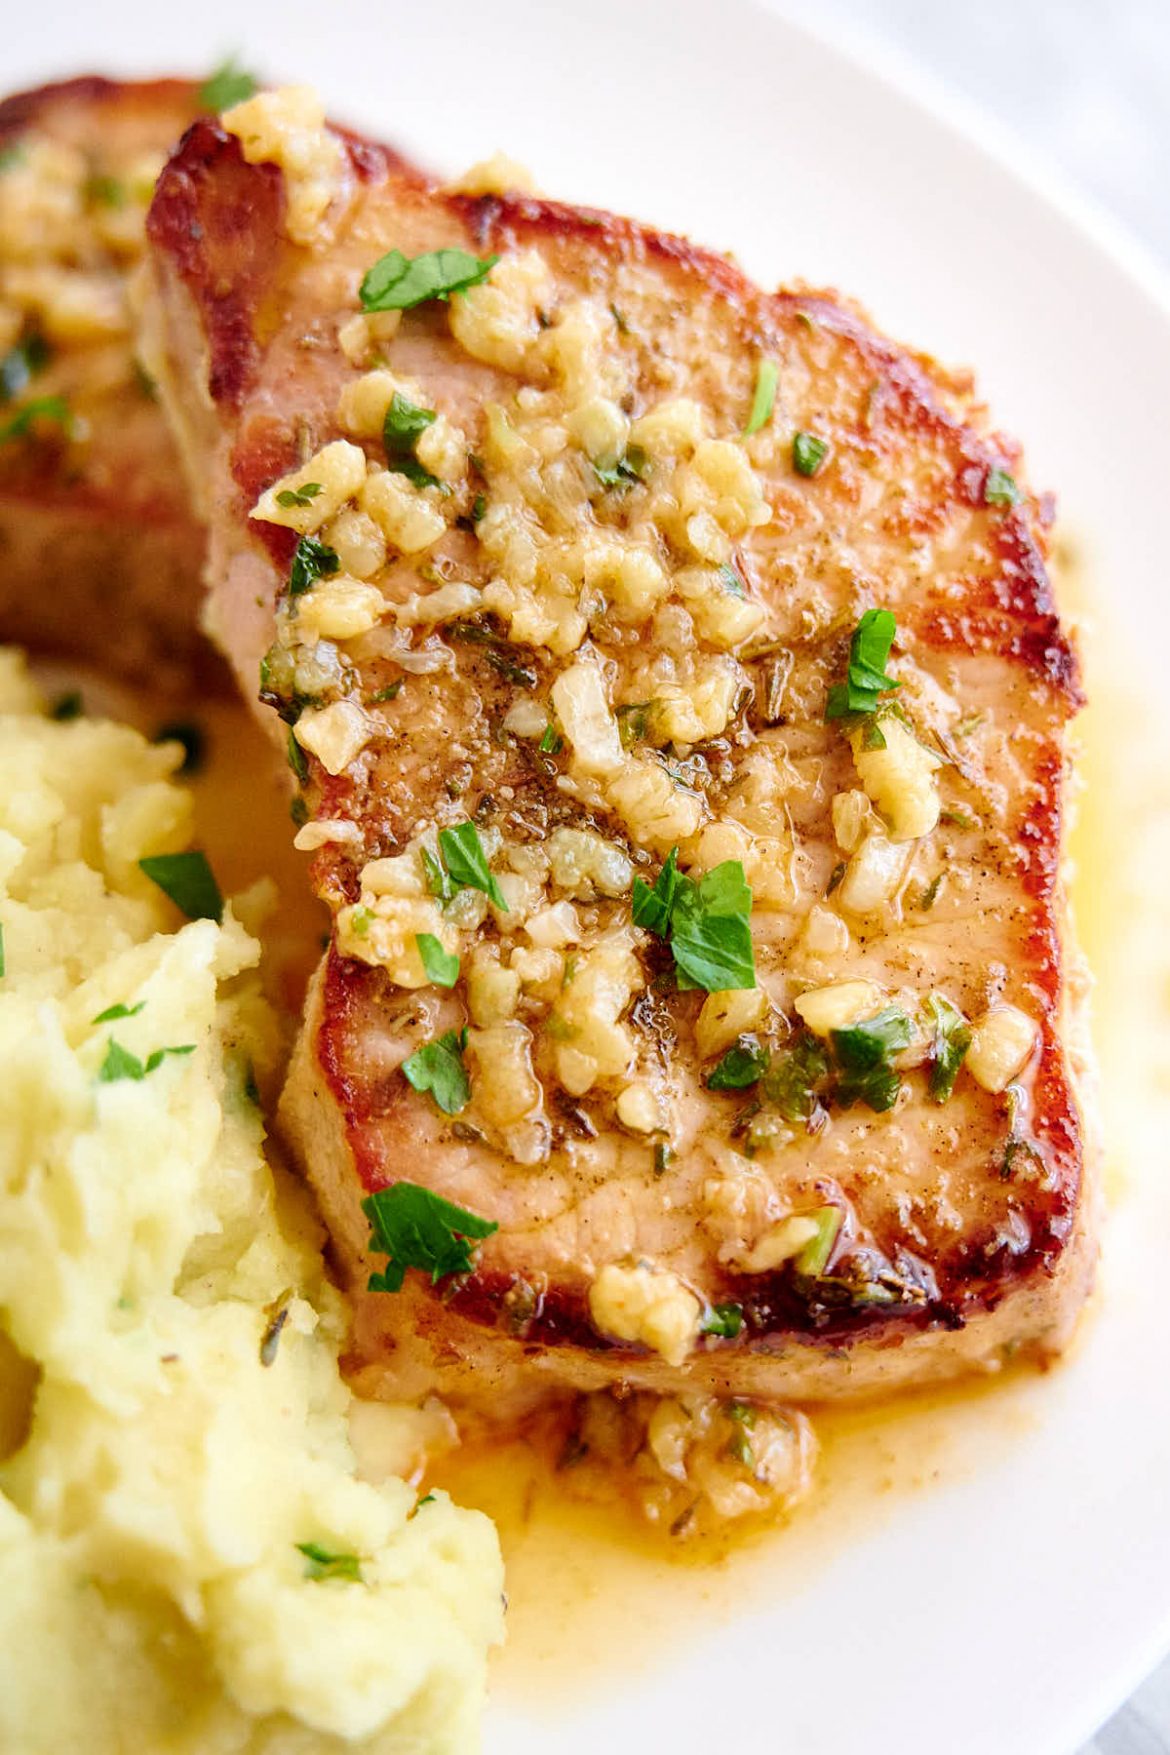 Baked Pork Chops with Browned Garlic Butter - Craving Tasty